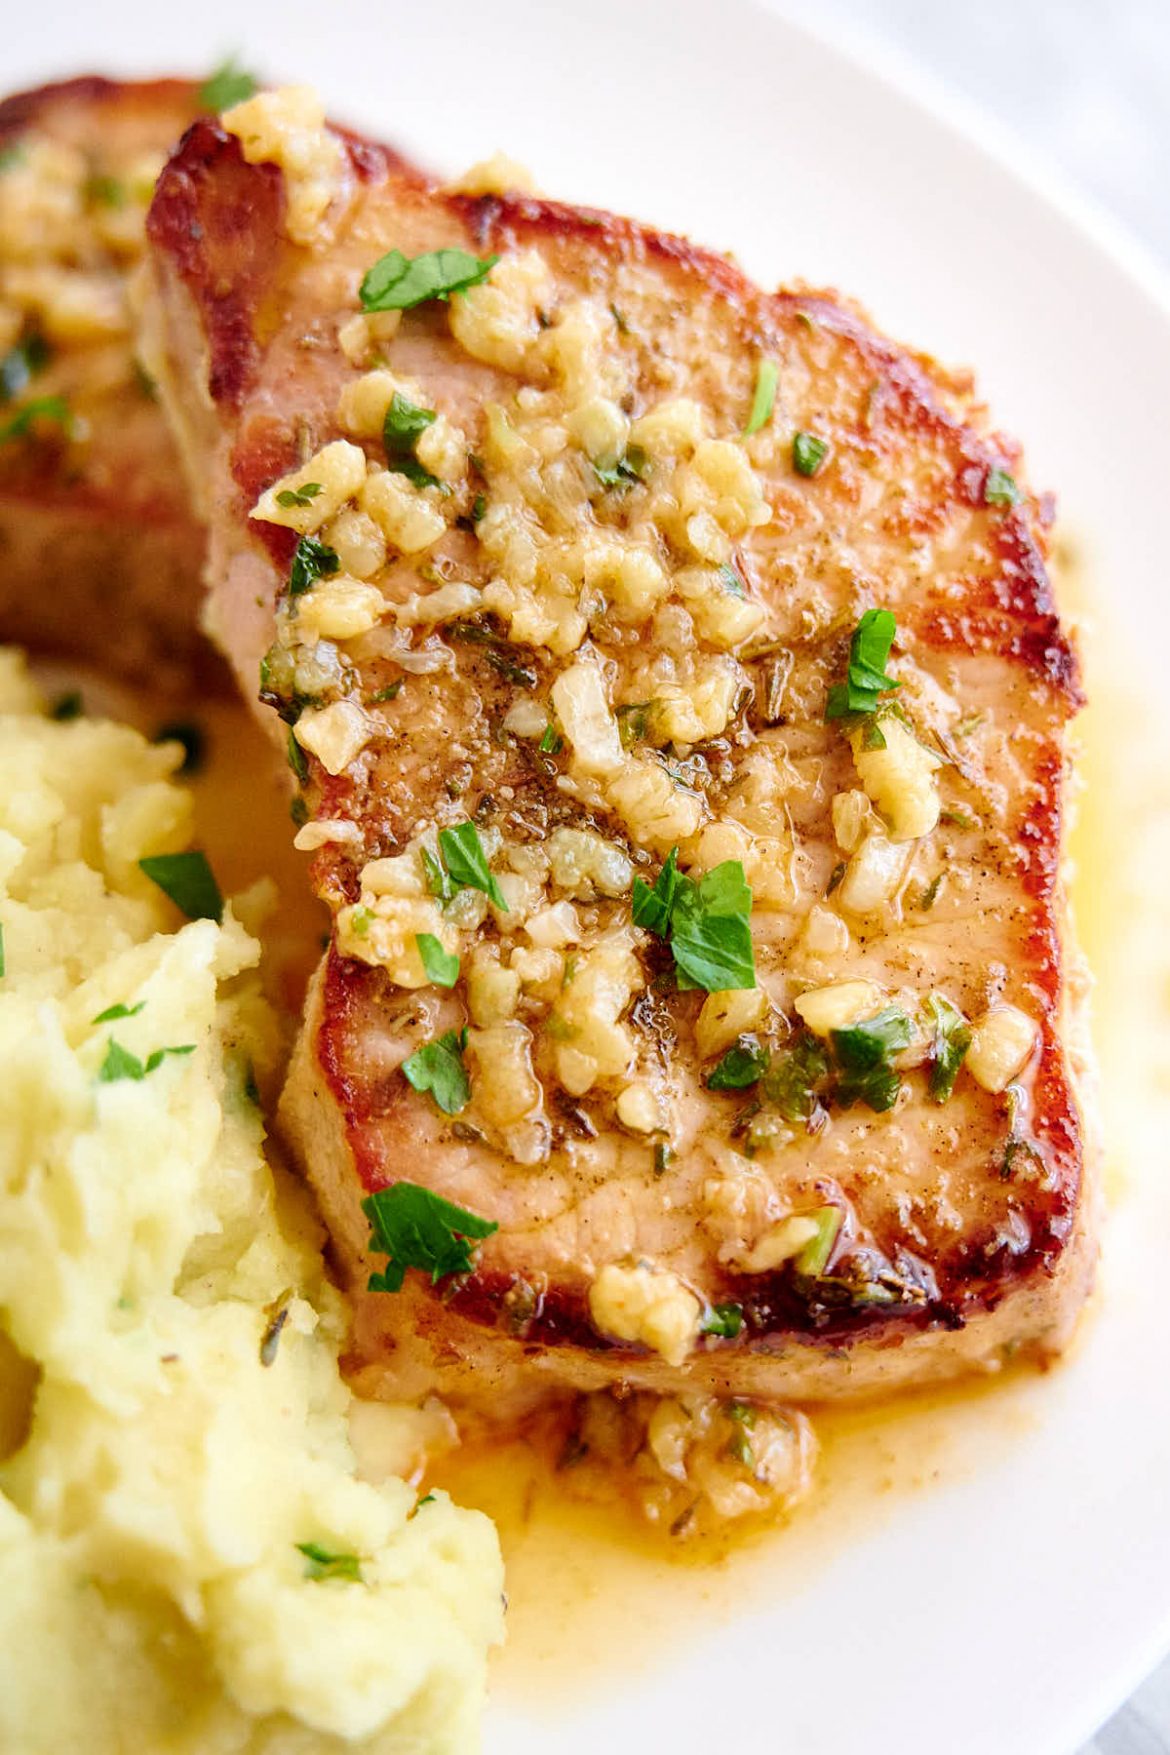 Baked Pork Chops with Browned Garlic Butter - Craving Tasty